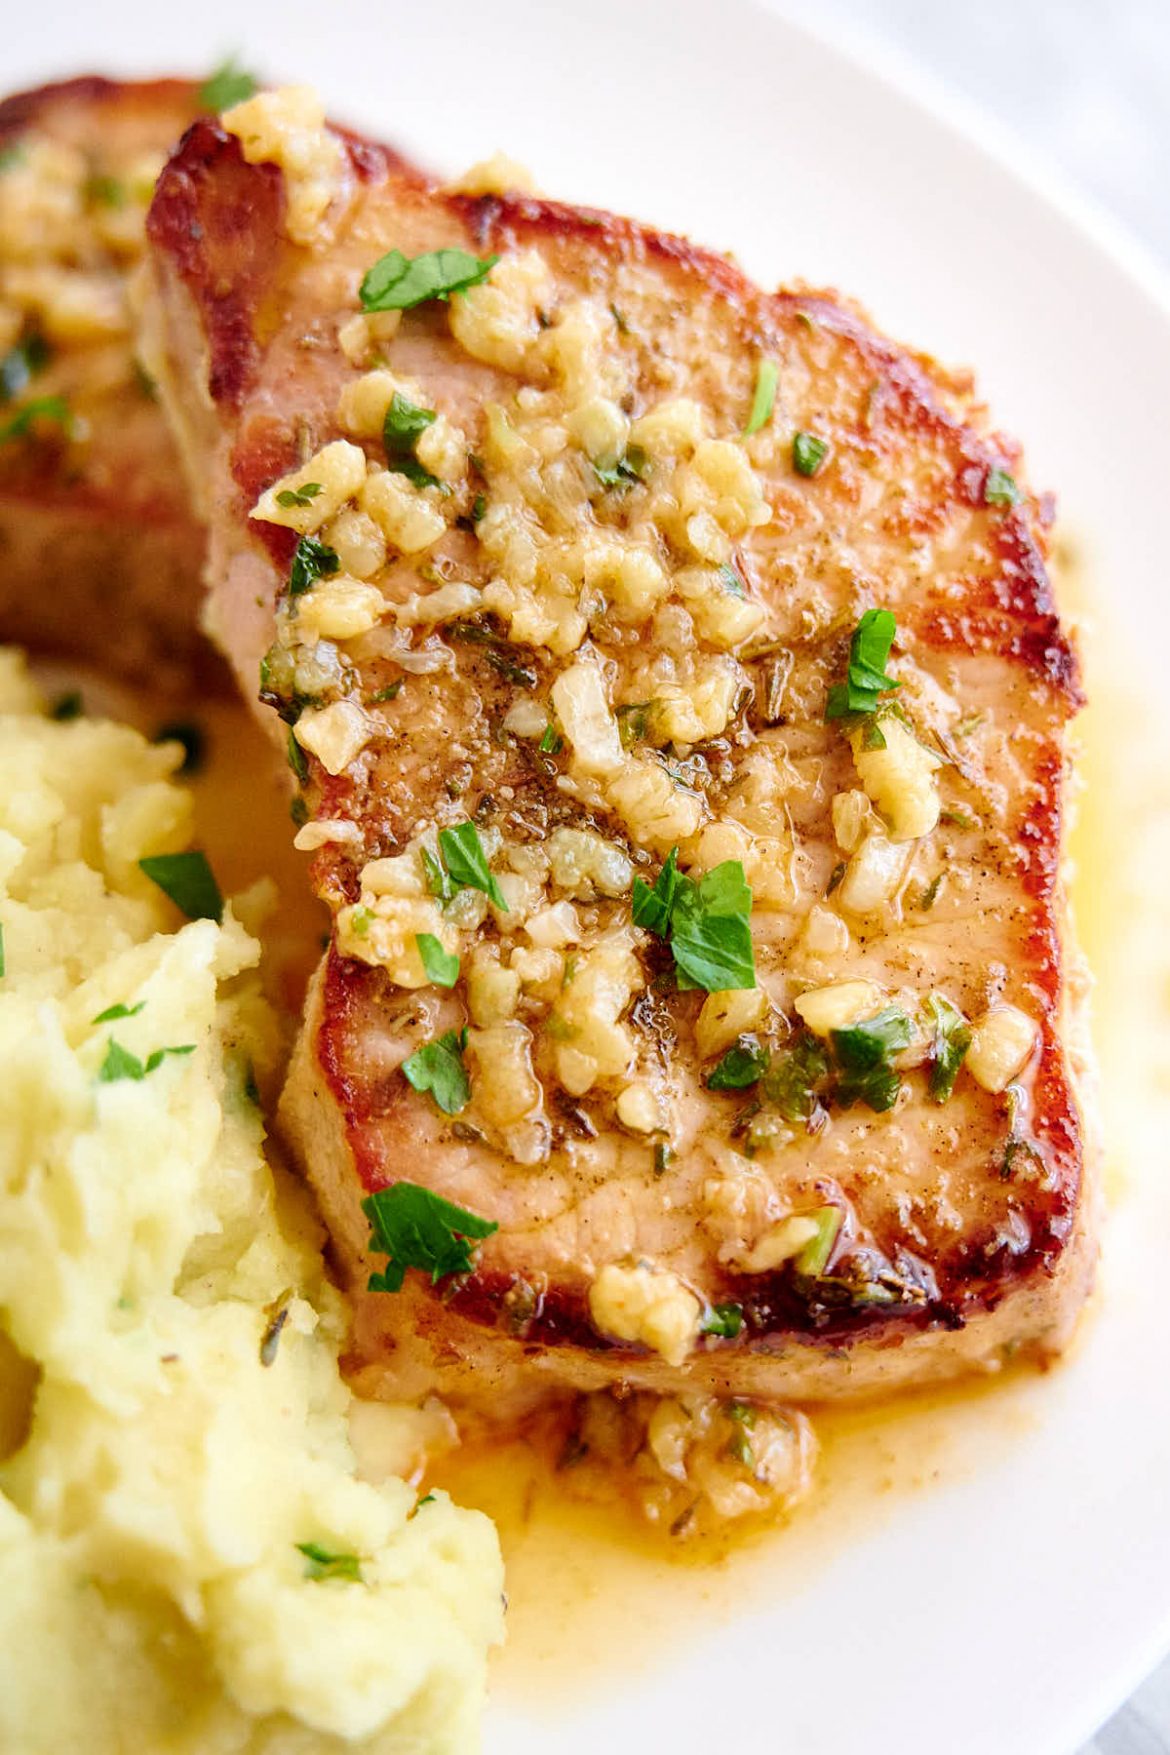 Baked Pork Chops with Browned Garlic Butter - Craving Tasty